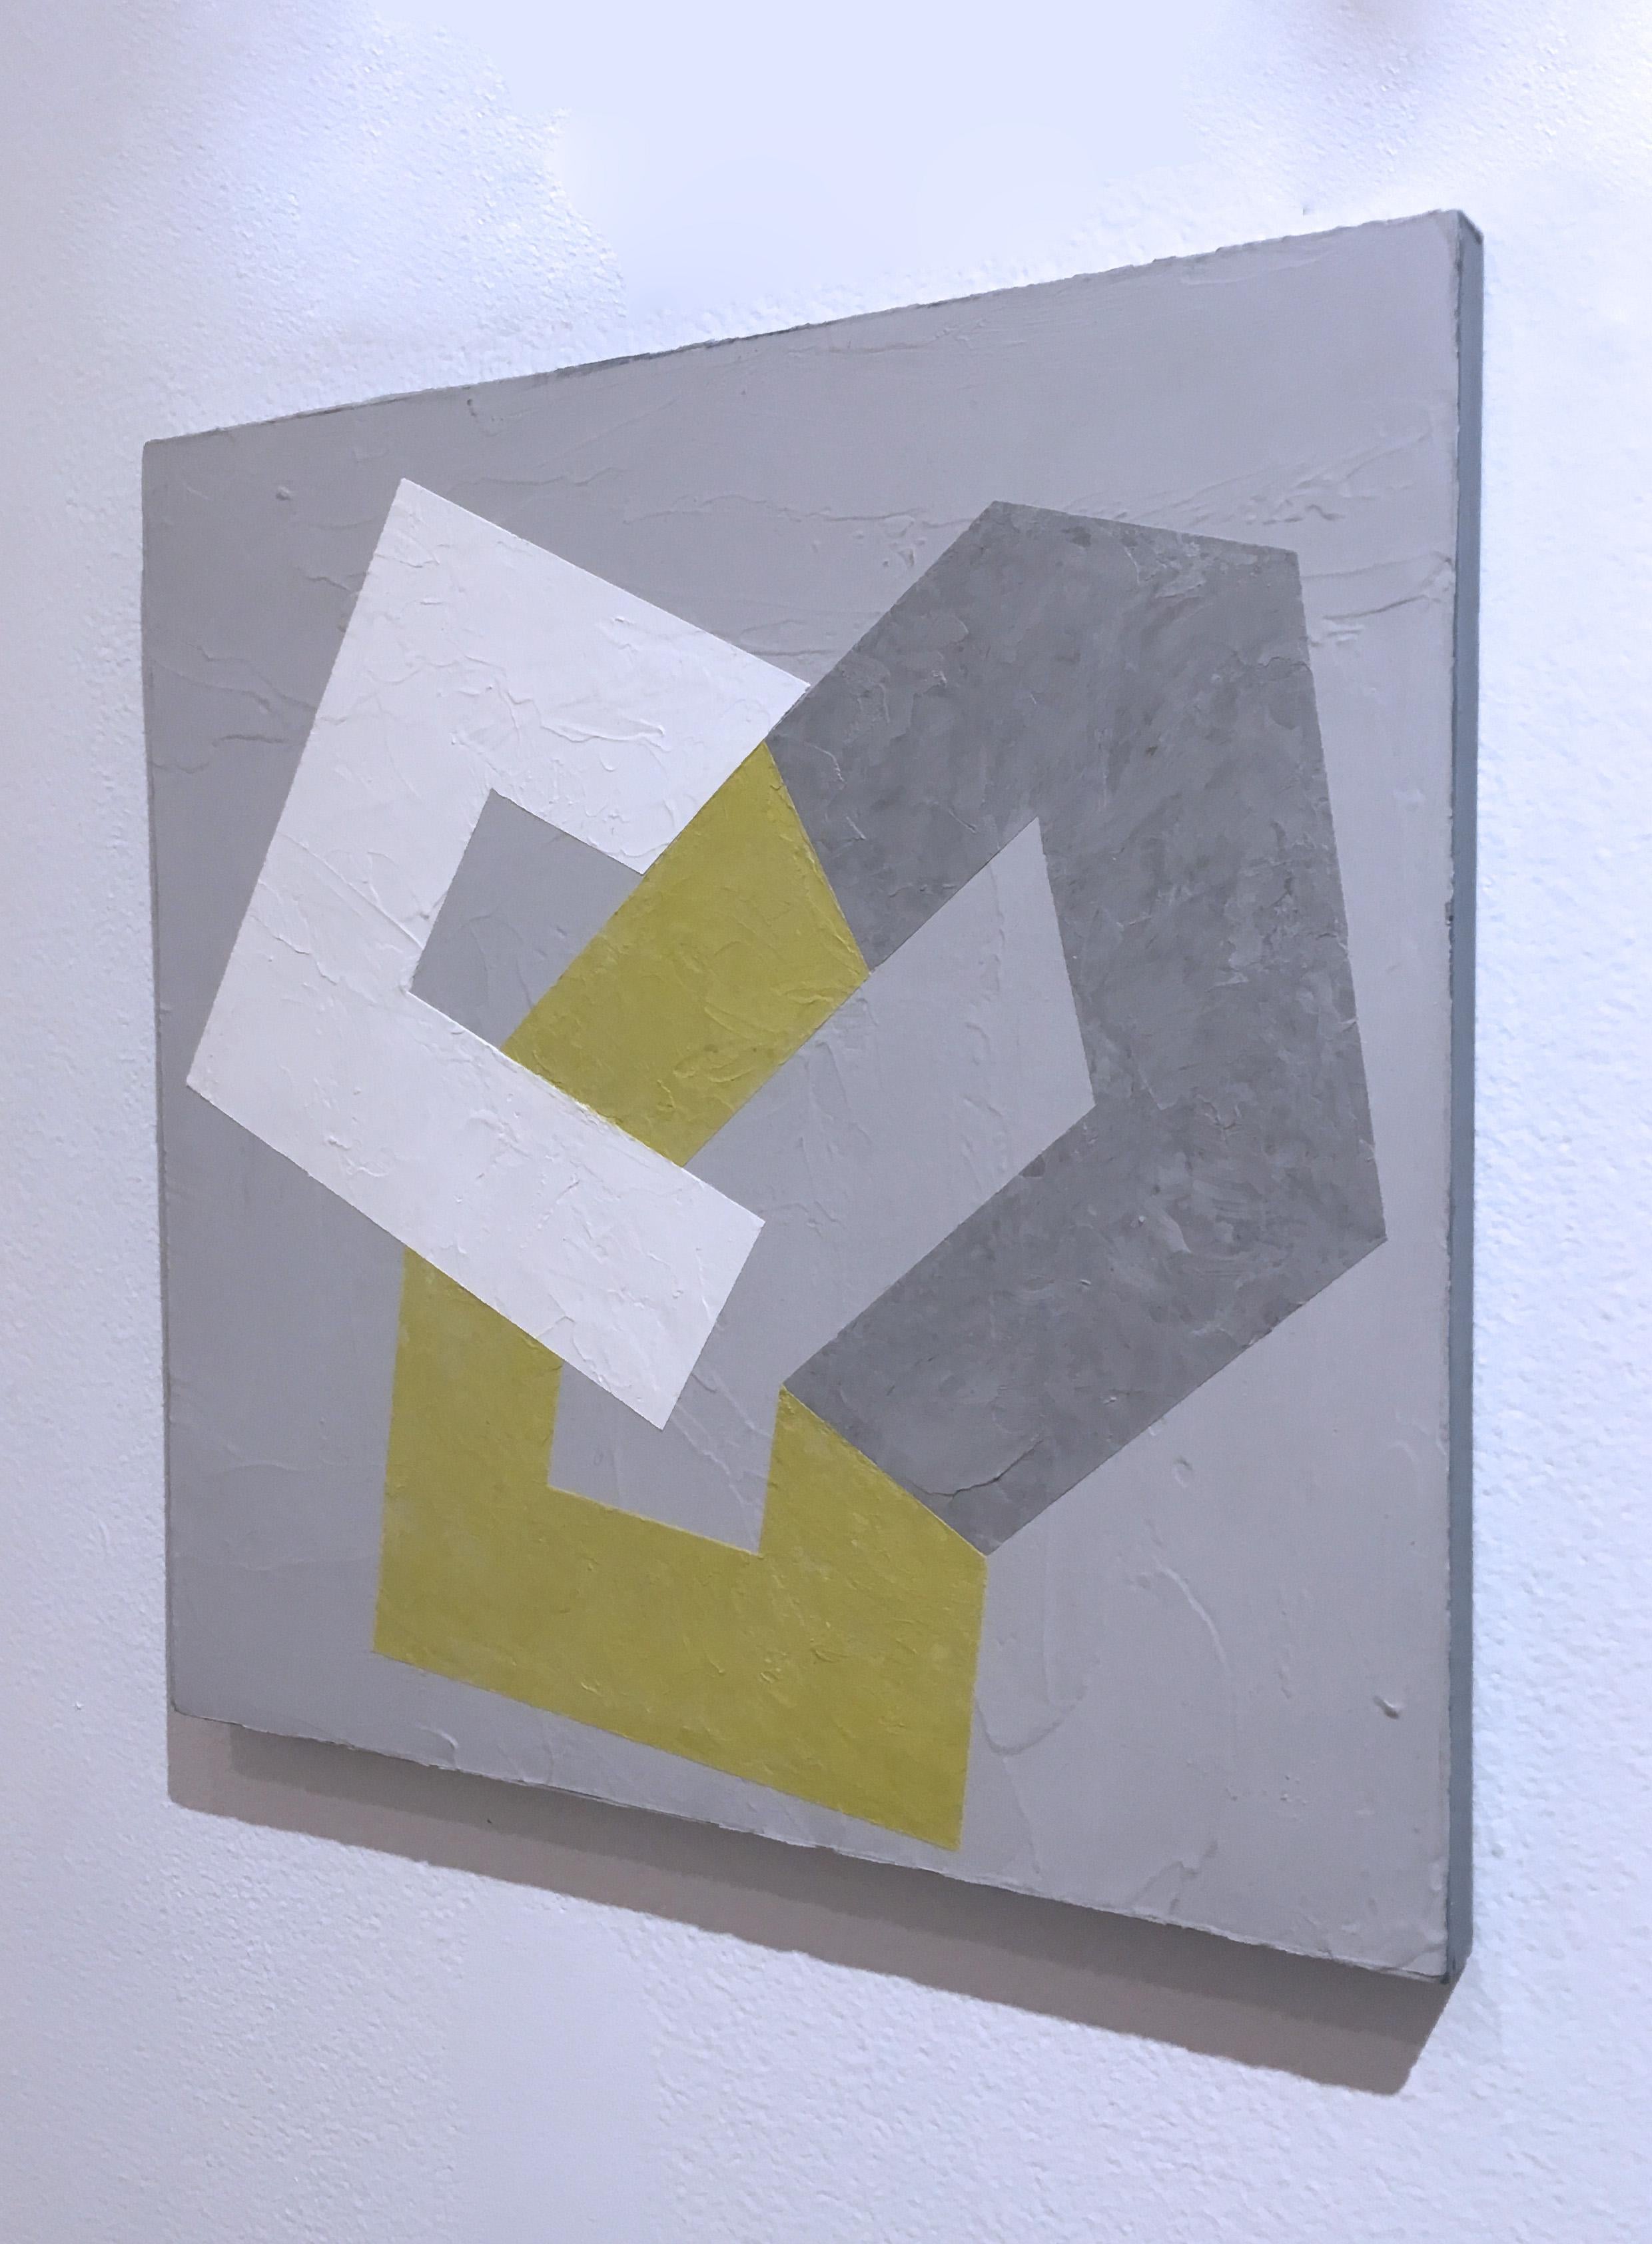 Options IX, 2020, Abstract geometry, non-objective, plaster, gray, green, white - Abstract Geometric Mixed Media Art by Kati Vilim